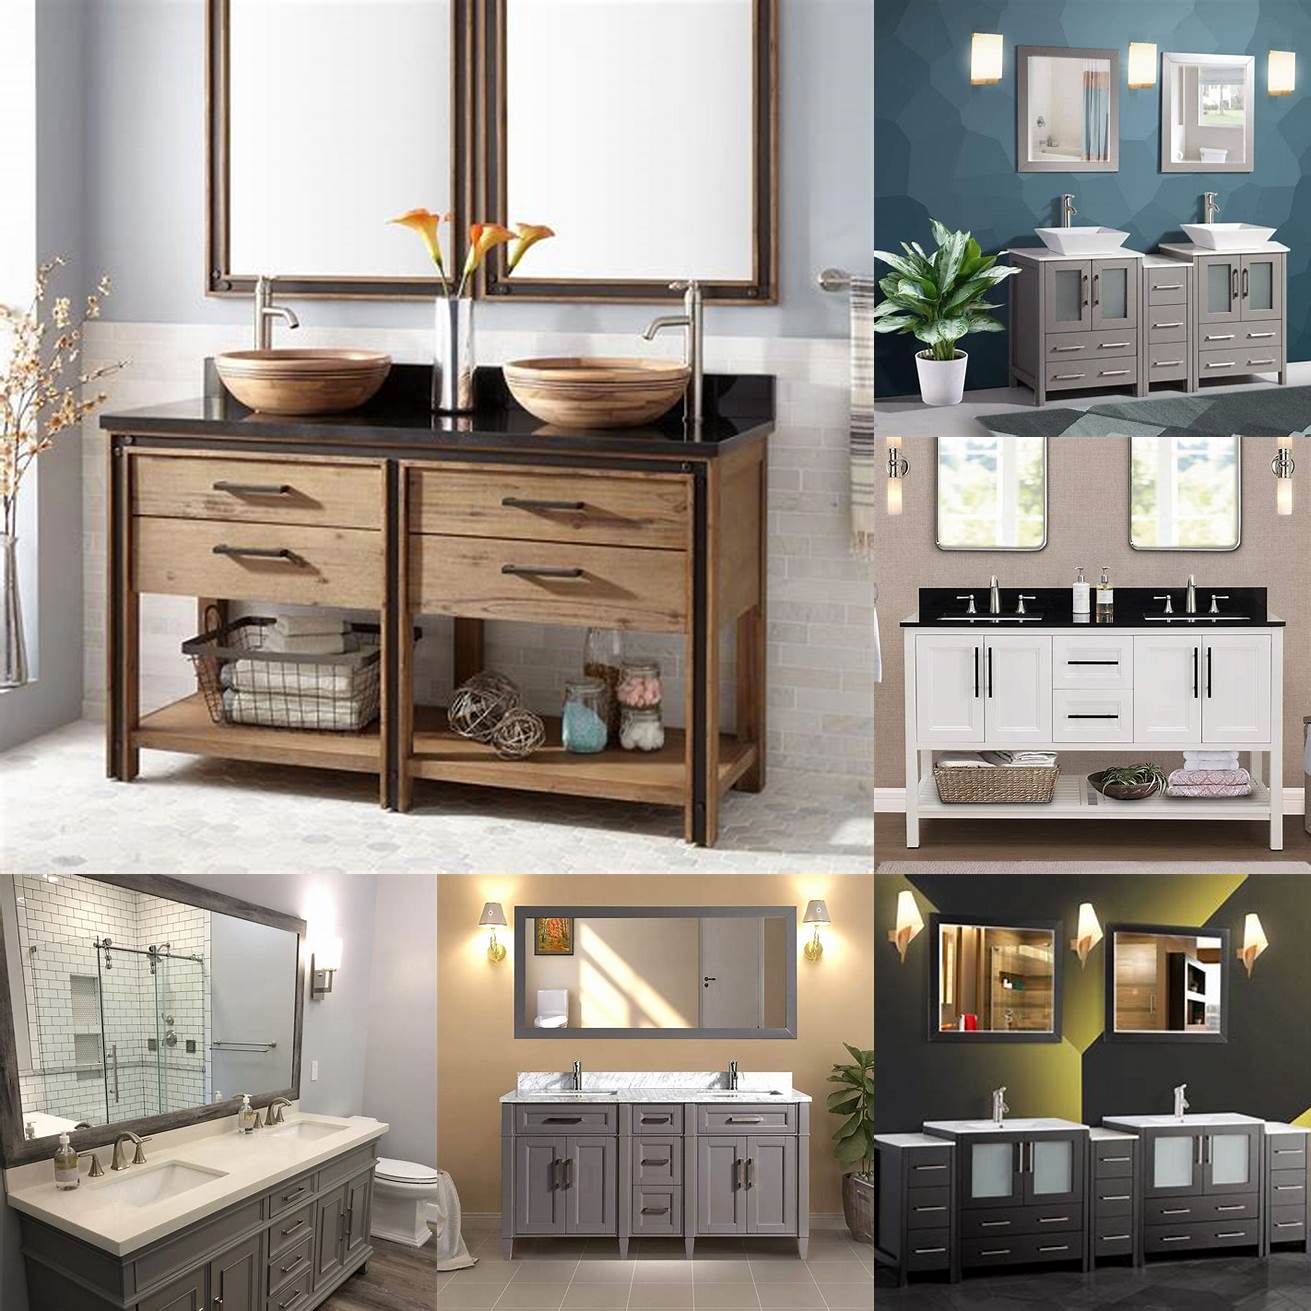 Consider Your Style Choose a dual sink bathroom vanity that complements your bathrooms style and decor